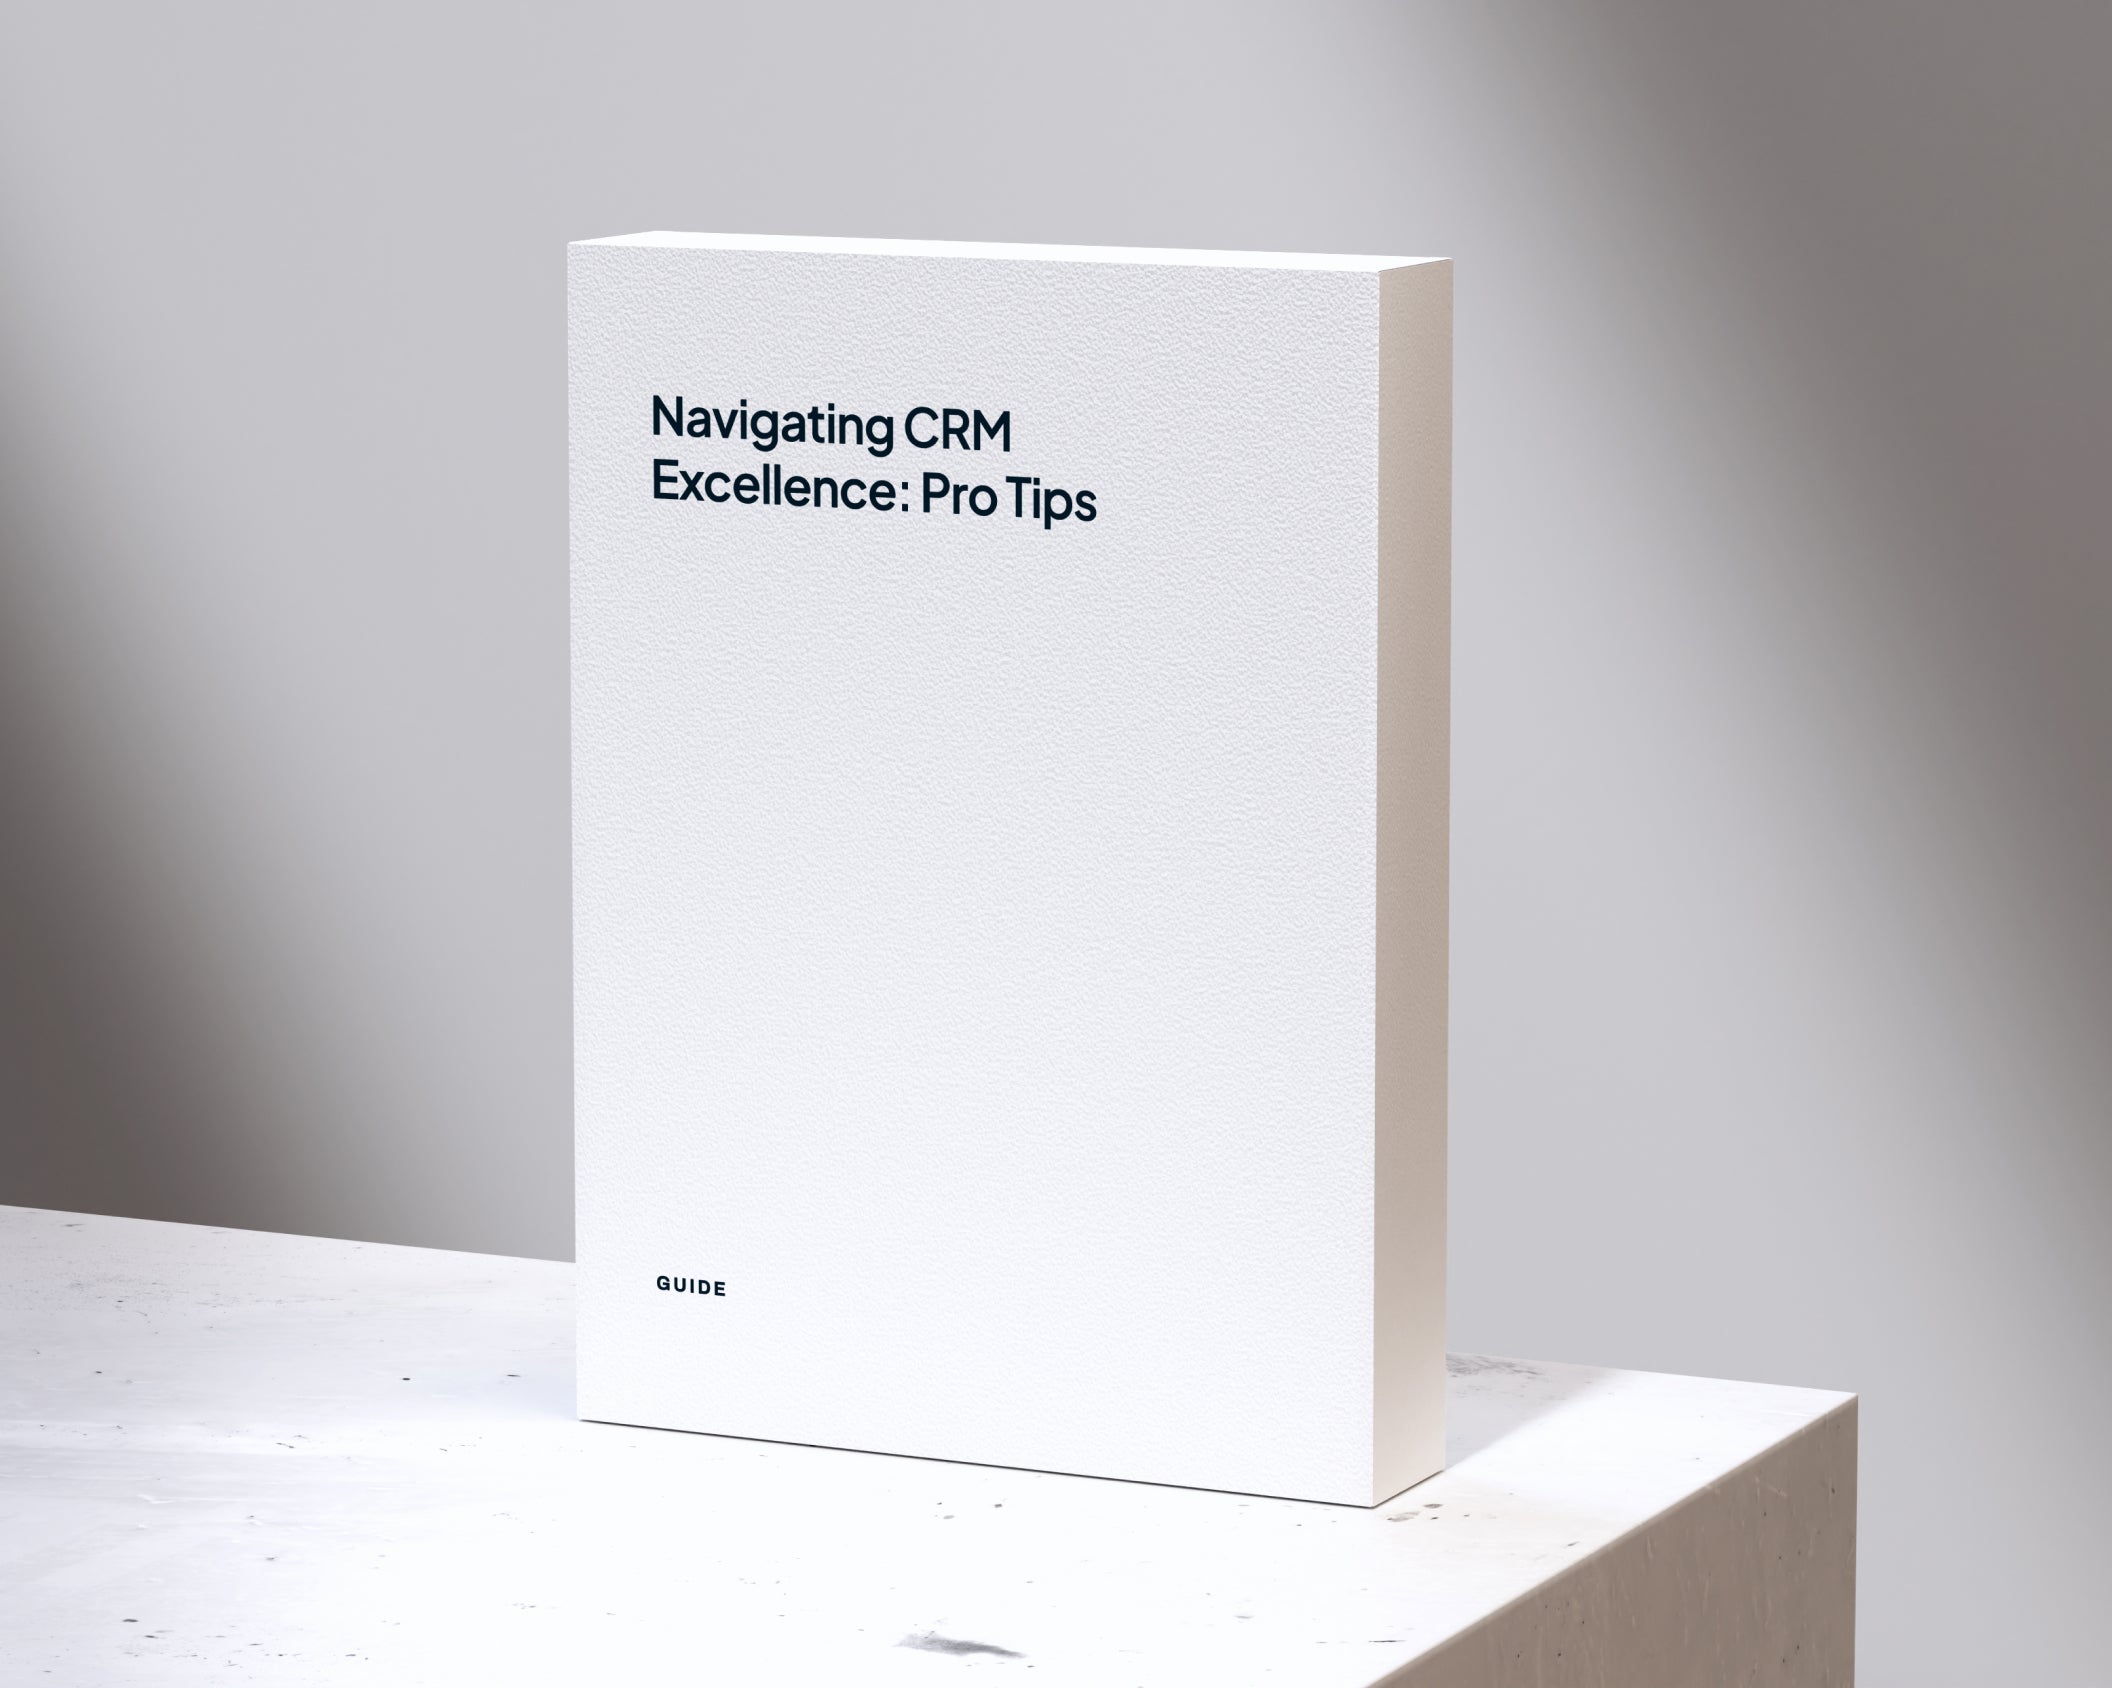 Navigating CRM Excellence: Pro Tips